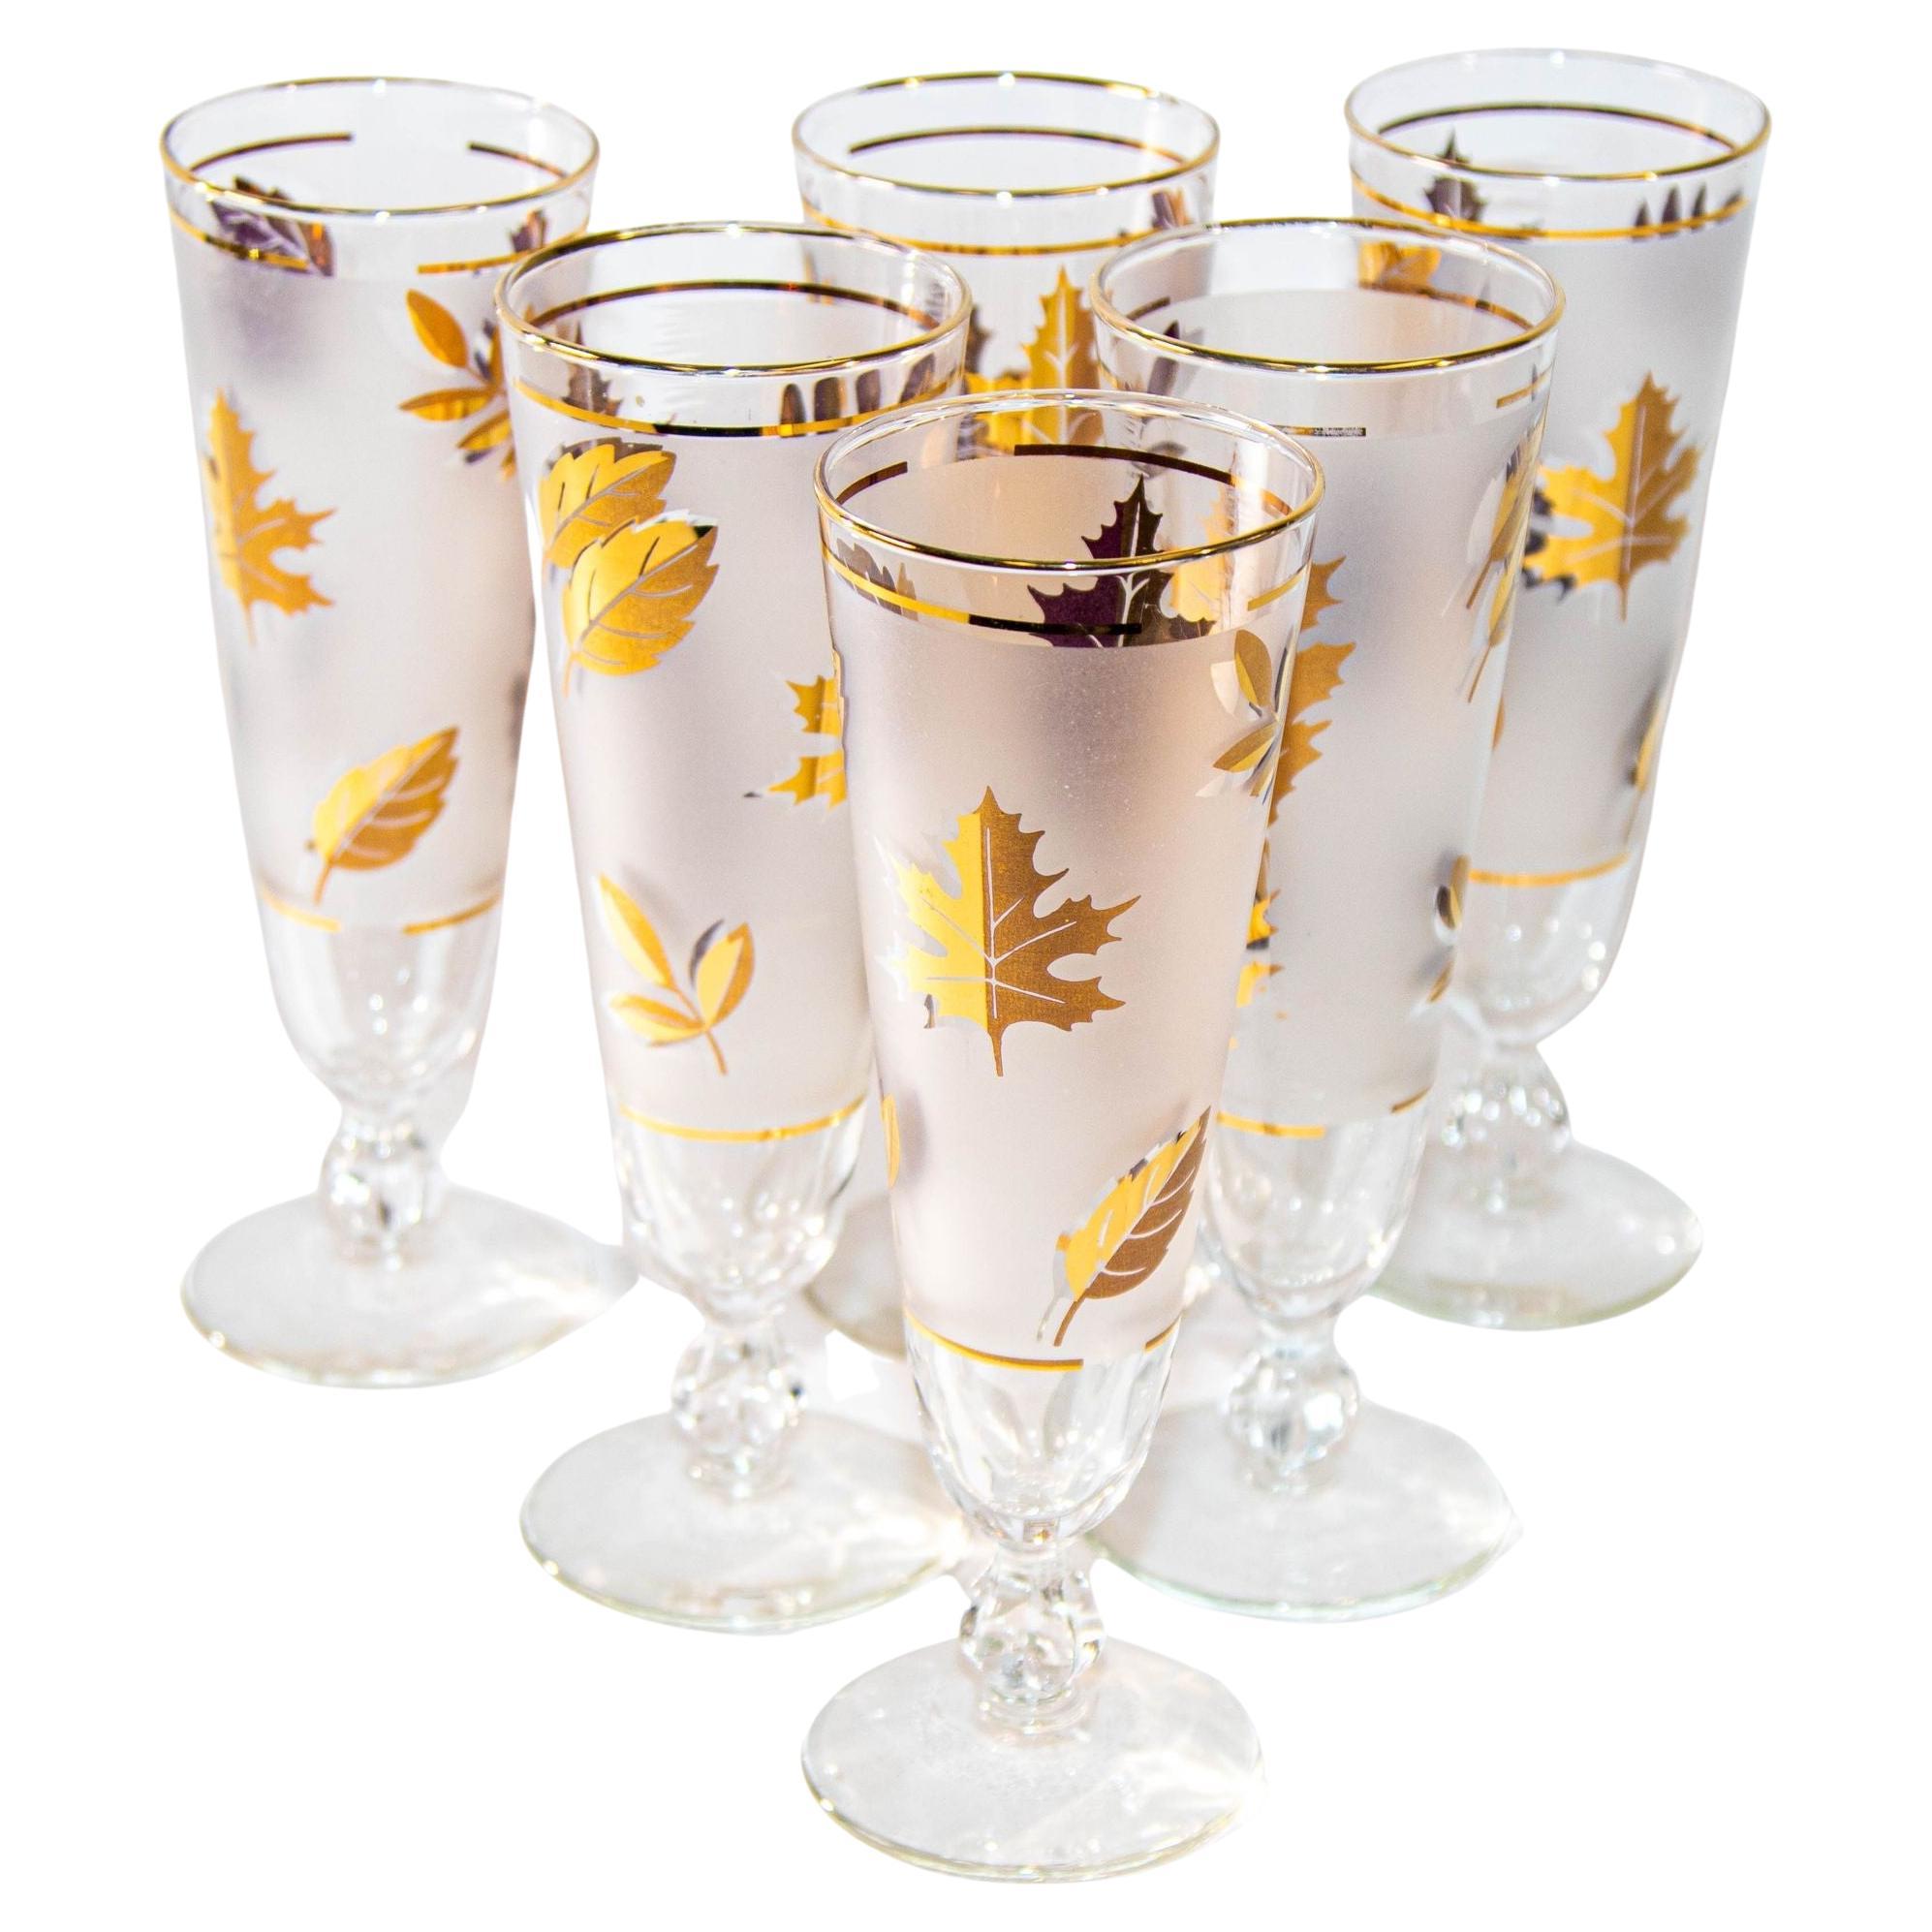 1950s Libbey Golden Foliage Pilsner Glass set of 6 Frosted with Gold Leaf